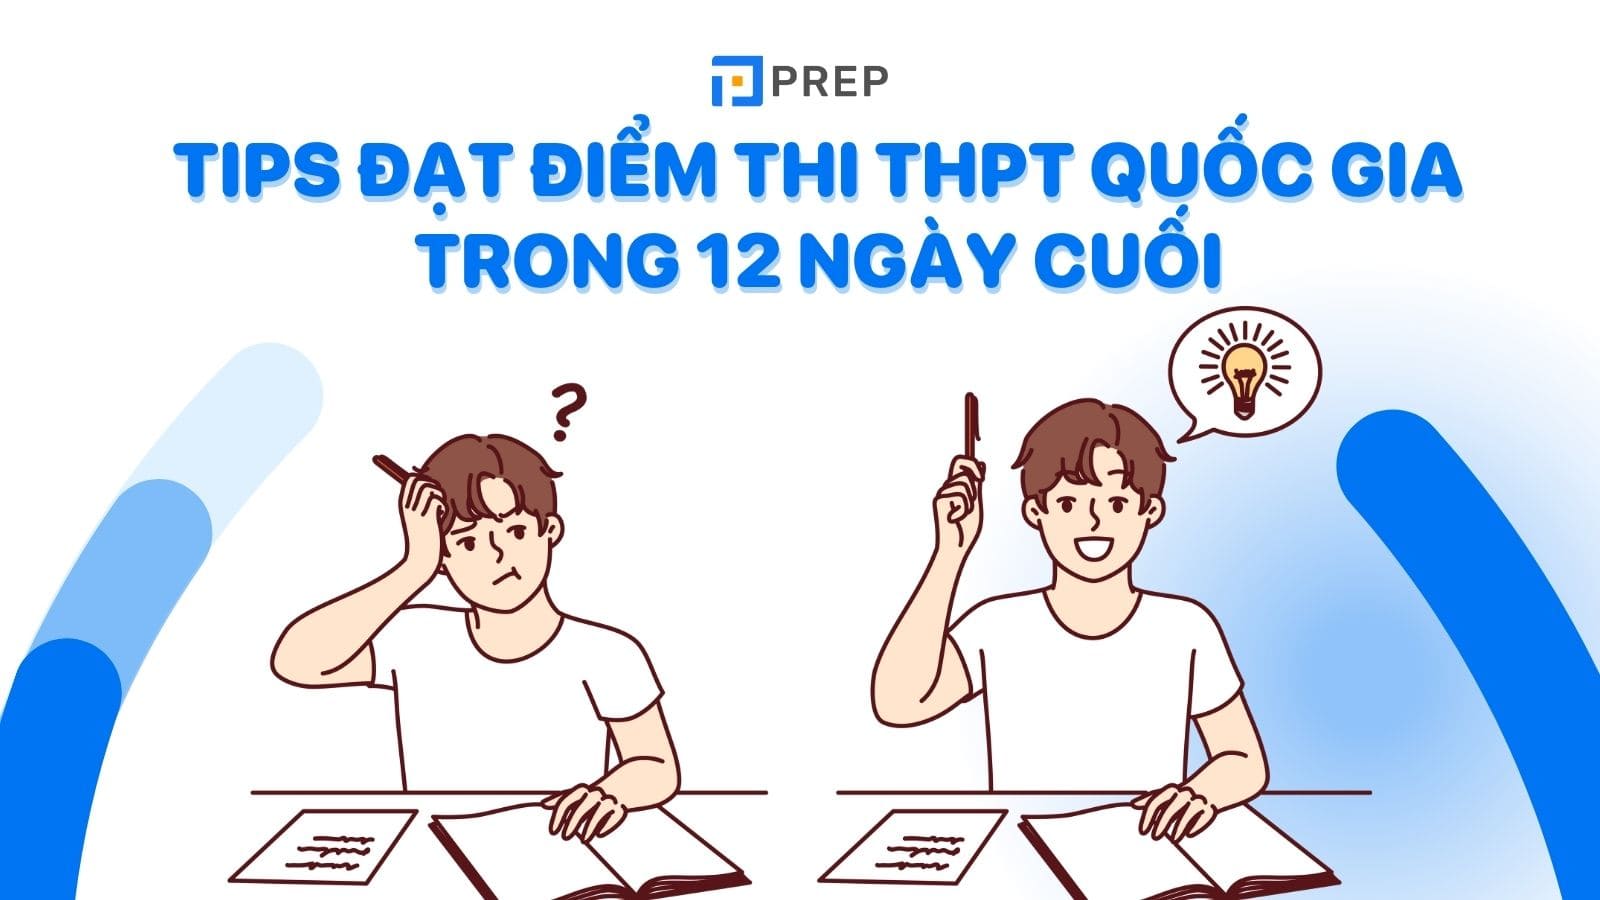 tips-cho-12-ngay-cuoi-on-thi-tieng-anh-thpt-quoc-gia.jpg